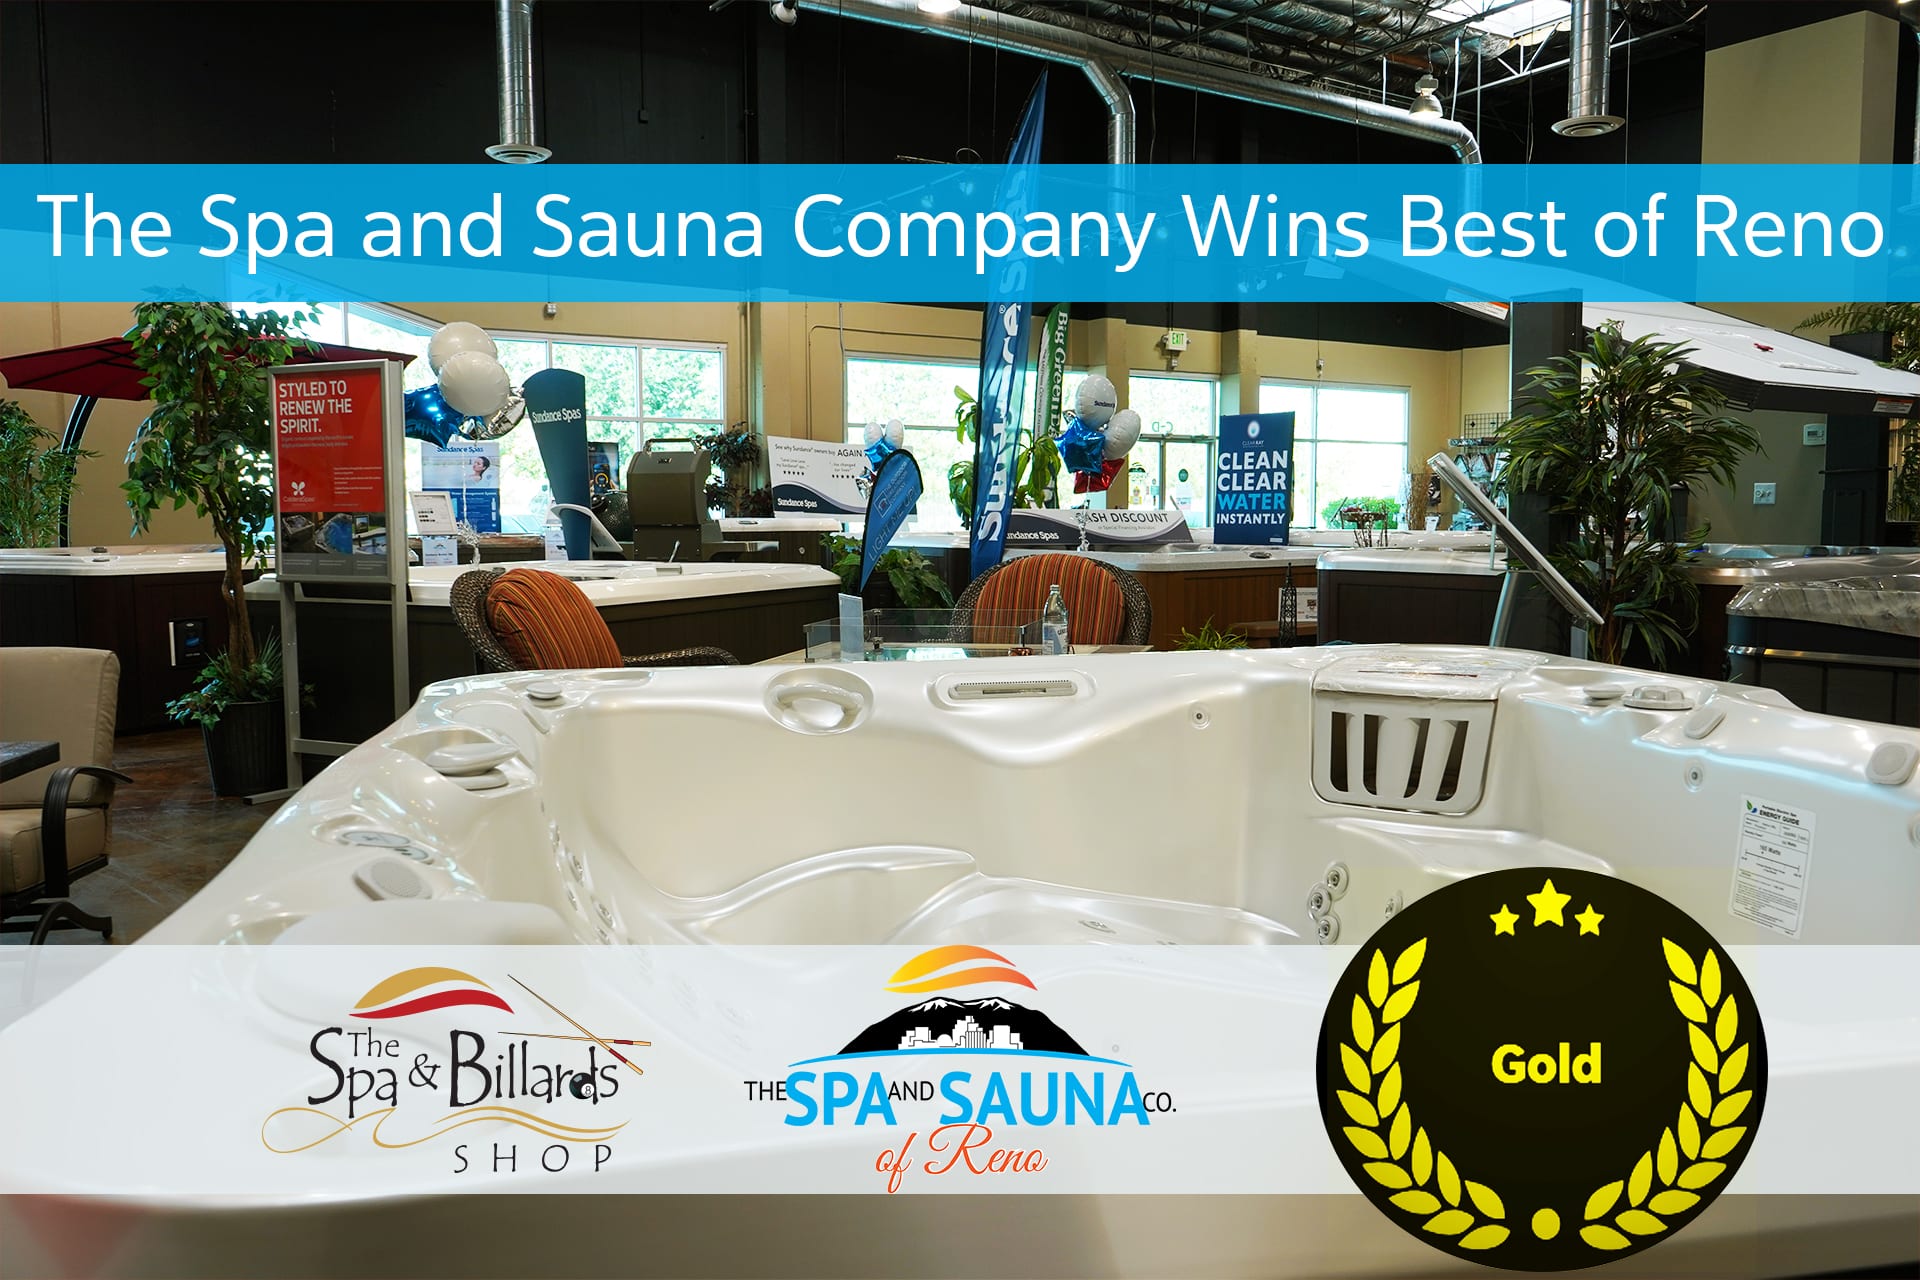 The Spa and Sauna Company Wins Best Of Reno from Reno Gazette Journal